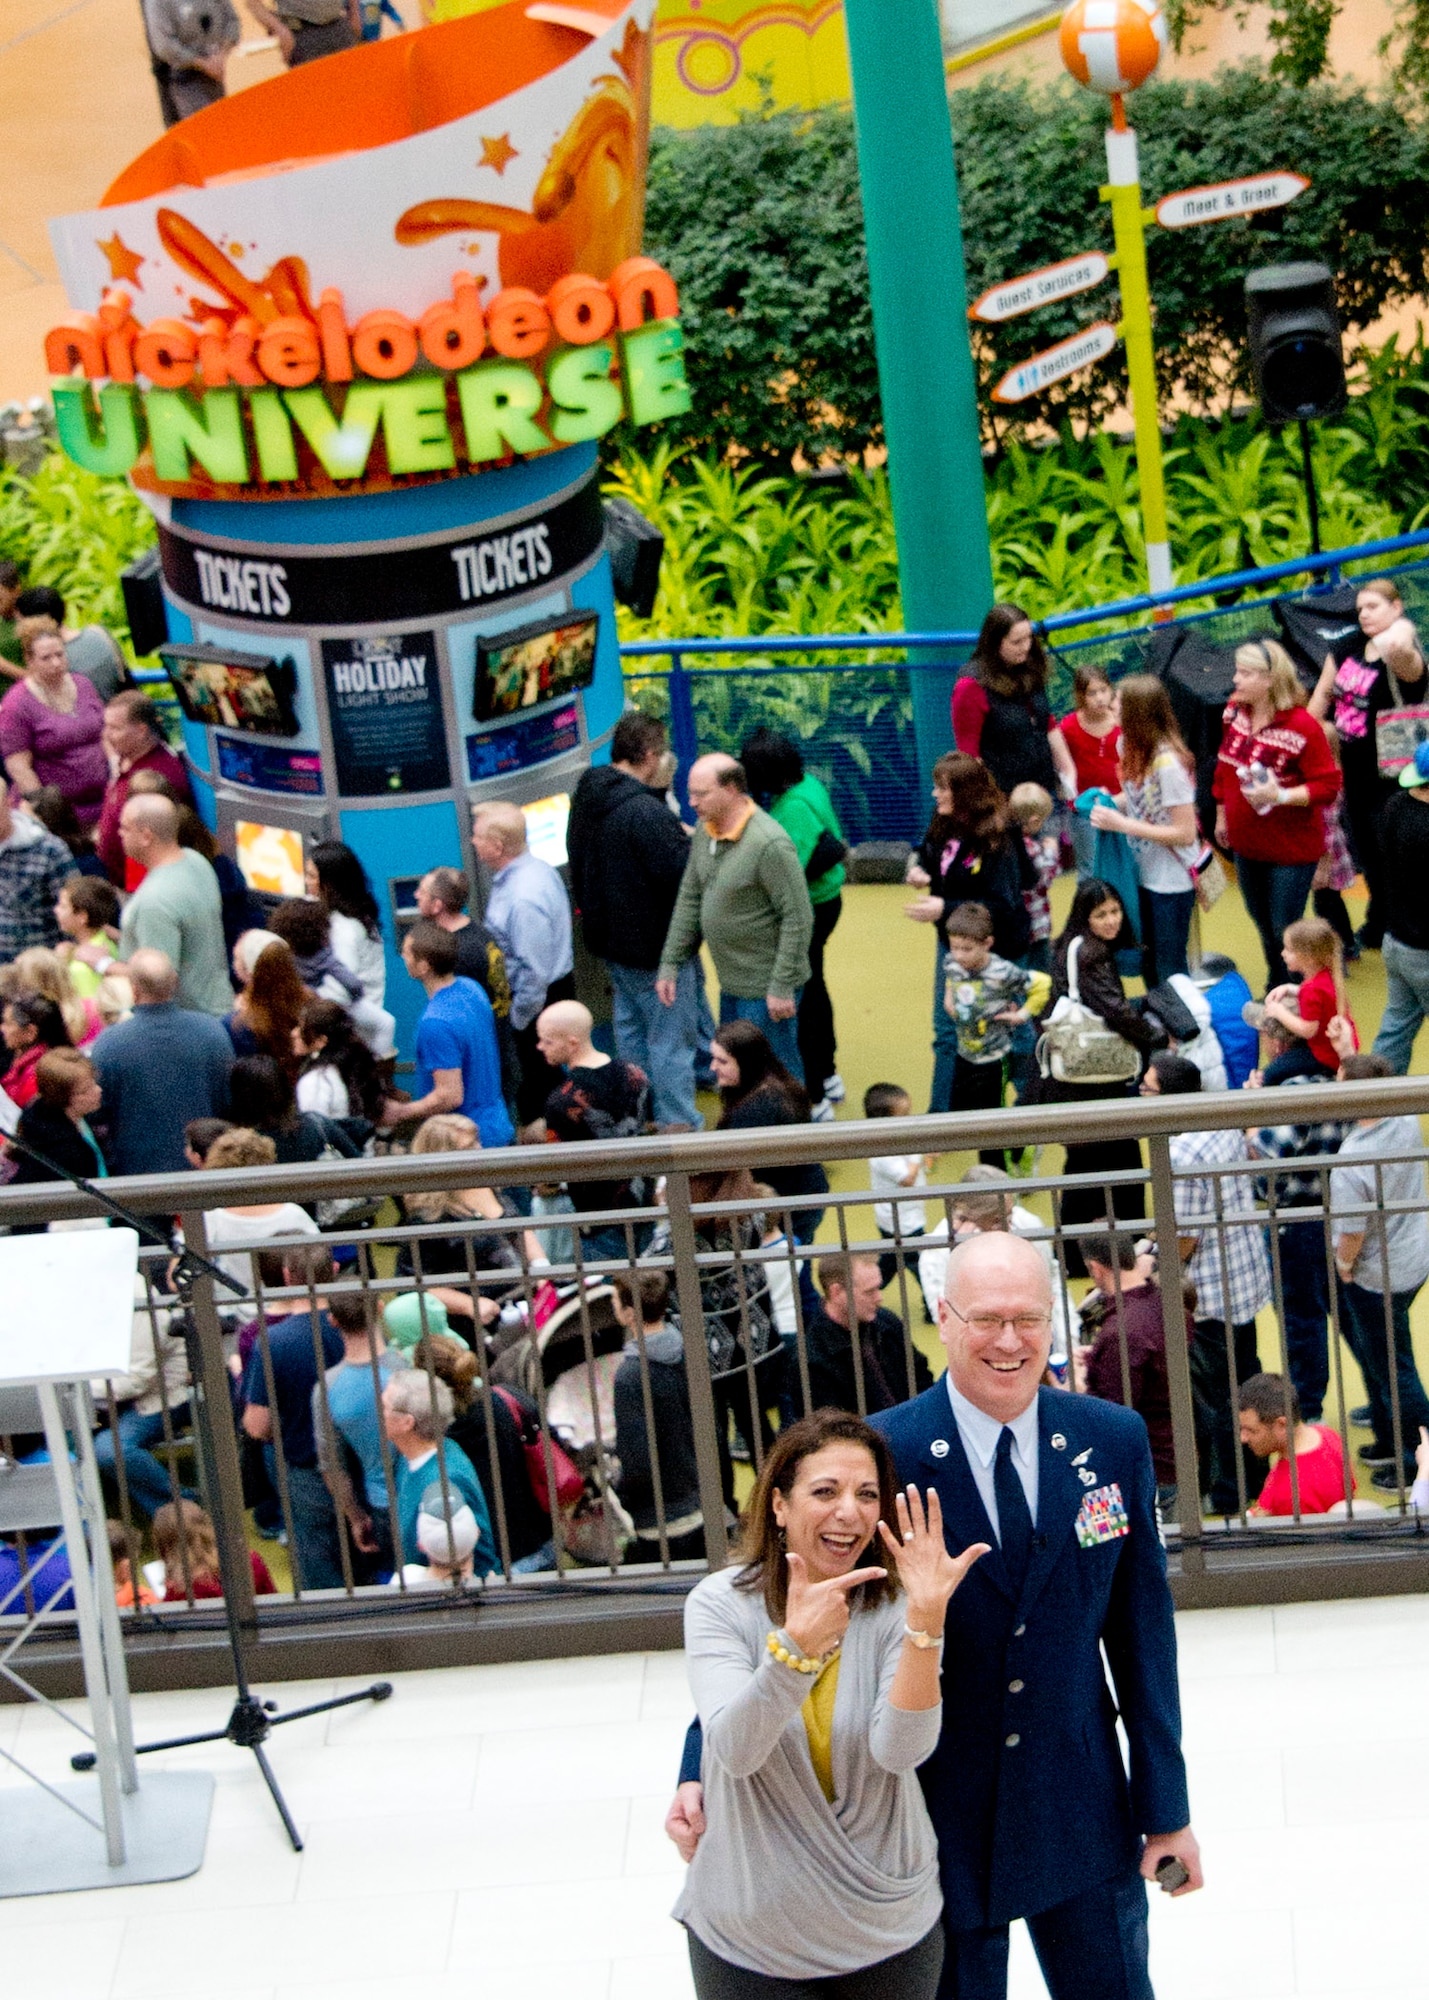 First Sgt. Robert Renning of 133rd Airlift Wing was able to give a surprise proposal to his longtime girlfriend during the Mall of America’s Holiday for Heroes, Dec 14, 2014.  Renning is the Wing’s Outstanding First Sergeant of 2014 and became famous this summer for his life saving efforts of recusing a man from a burning vehicle.   (U.S. Air National Guard Photo by Tech. Sgt. Lynette Olivares / Released)